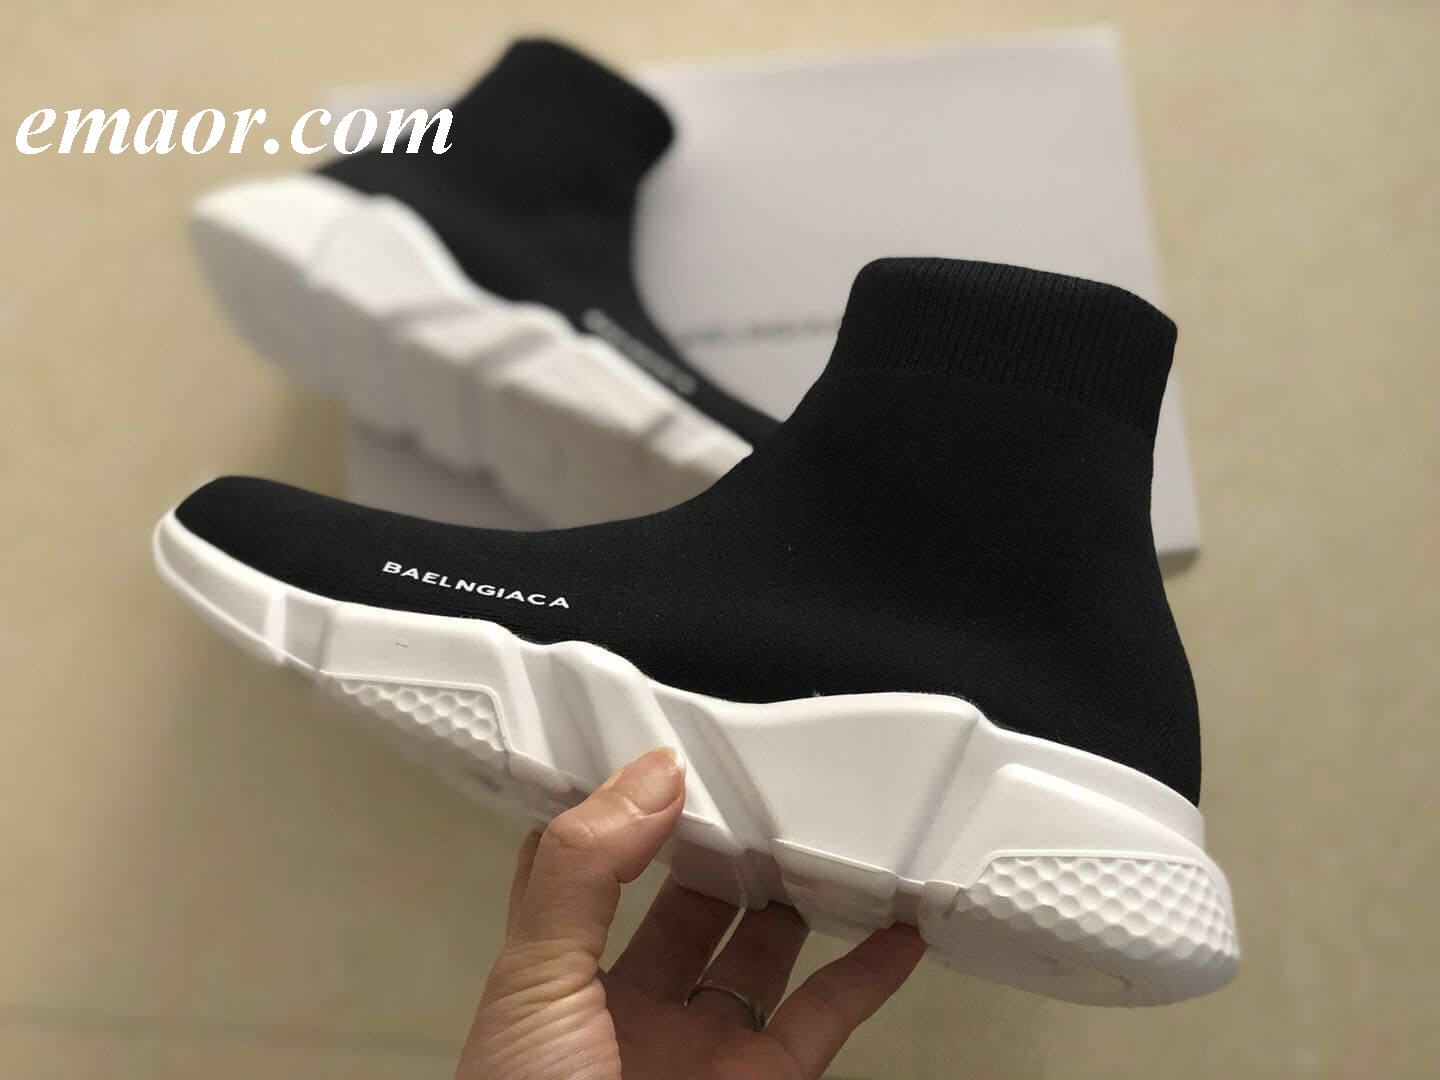  Champion Sock Shoes Brand High Top Men's Sock Shoes Slip On Comfortable Casual Sock Sneakers Shoes Men's Fashion Stretch Mans Footwear Non-slip Sneakers Champion Sock Shoes